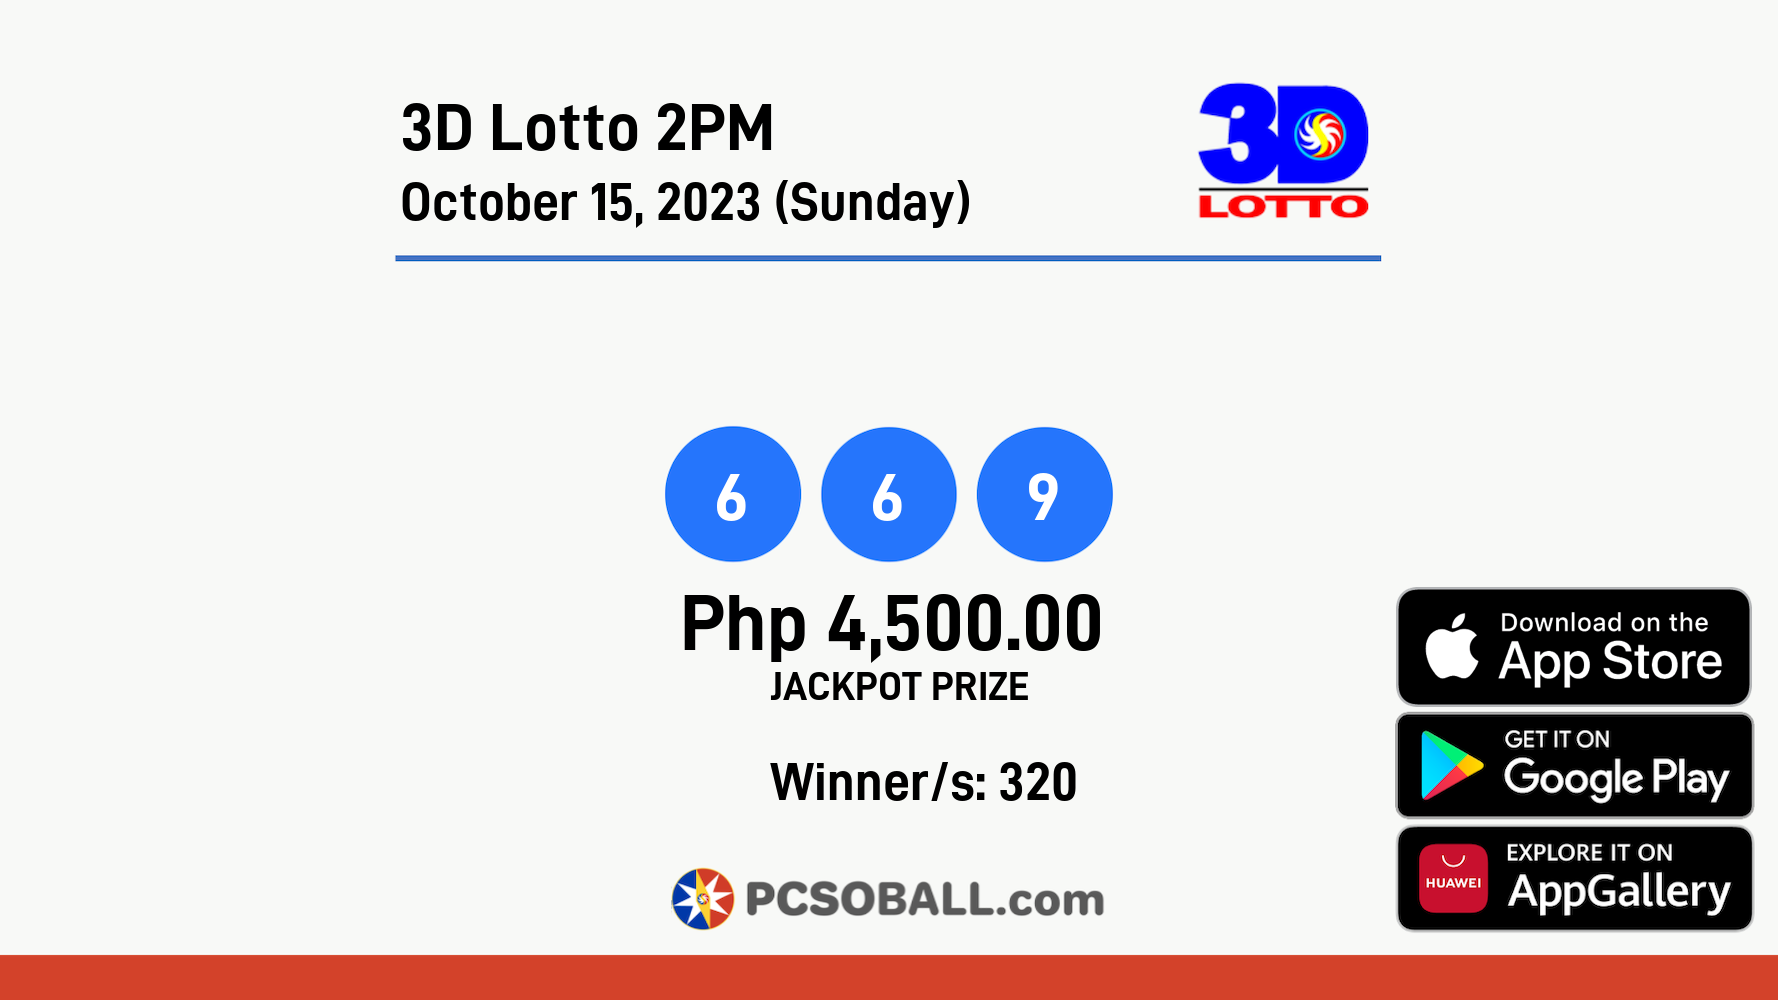 3D Lotto 2PM October 15, 2023 (Sunday) Result